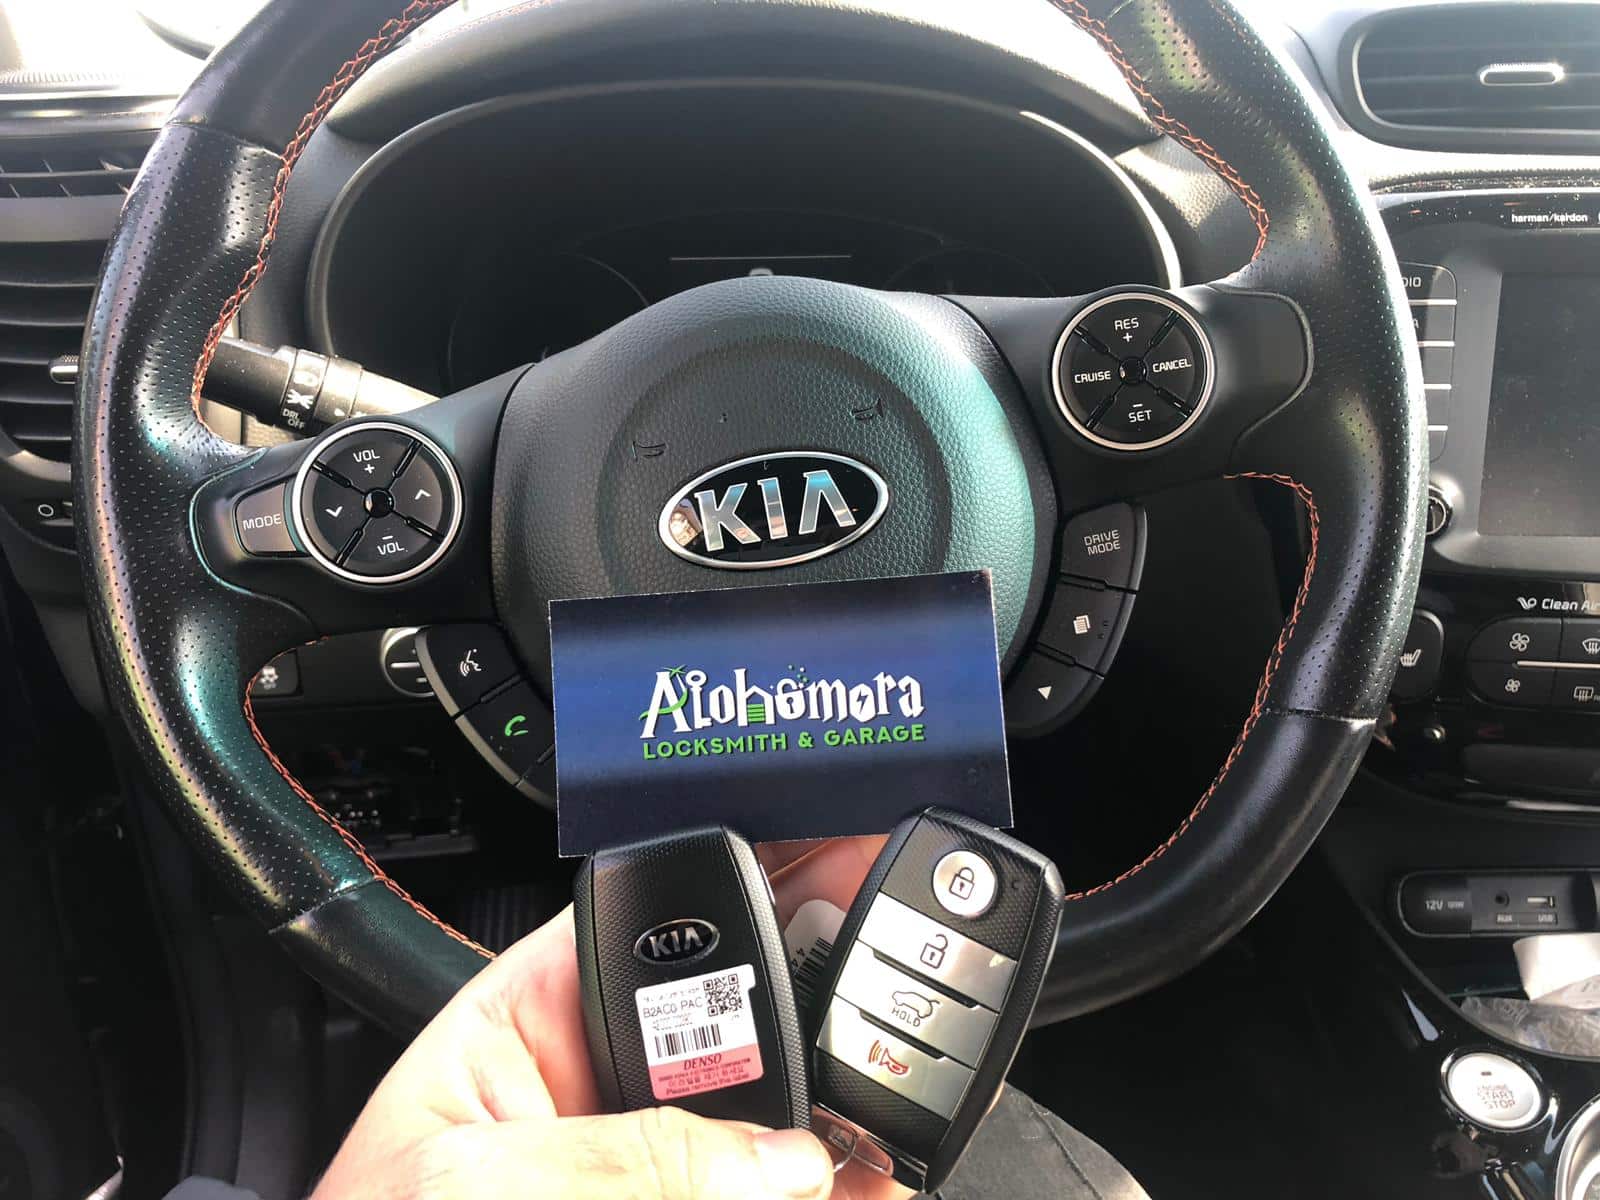 Inside a BMW with keys being held up to the steering wheel | Alohomora Locksmith Services All BMW Makes and Models in Portland OR